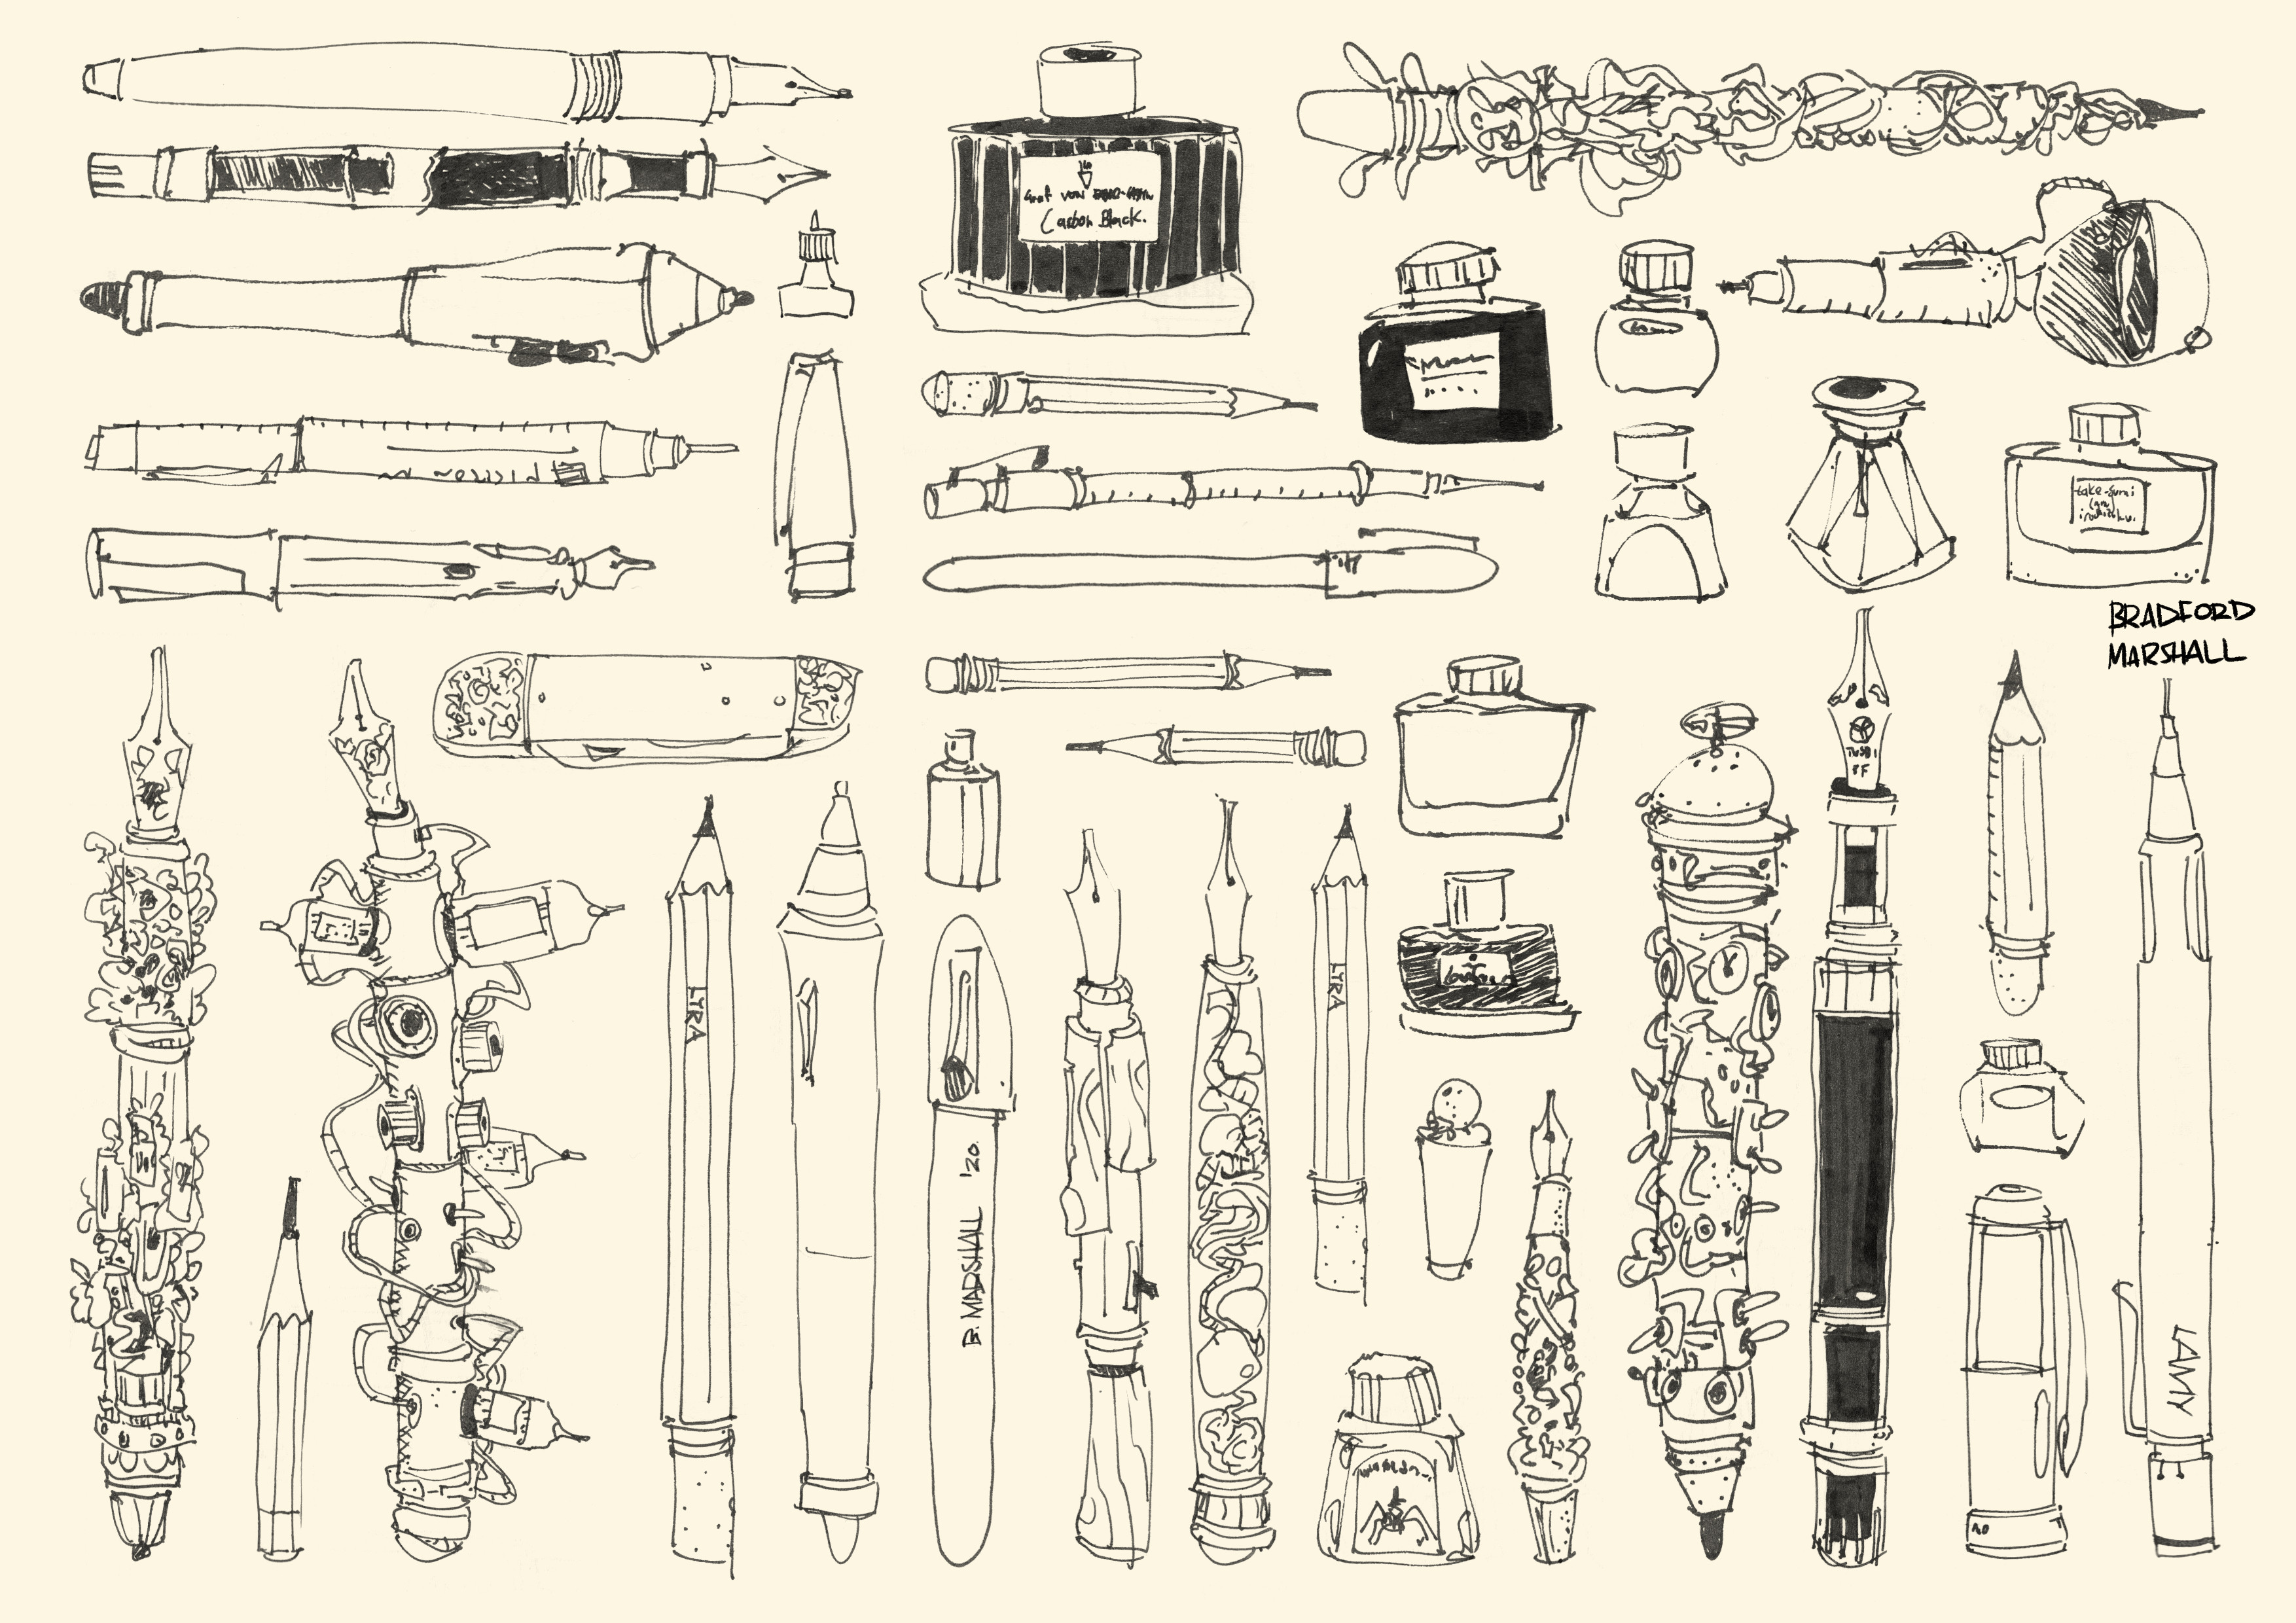 Knolling - the art of arranging things neatly 